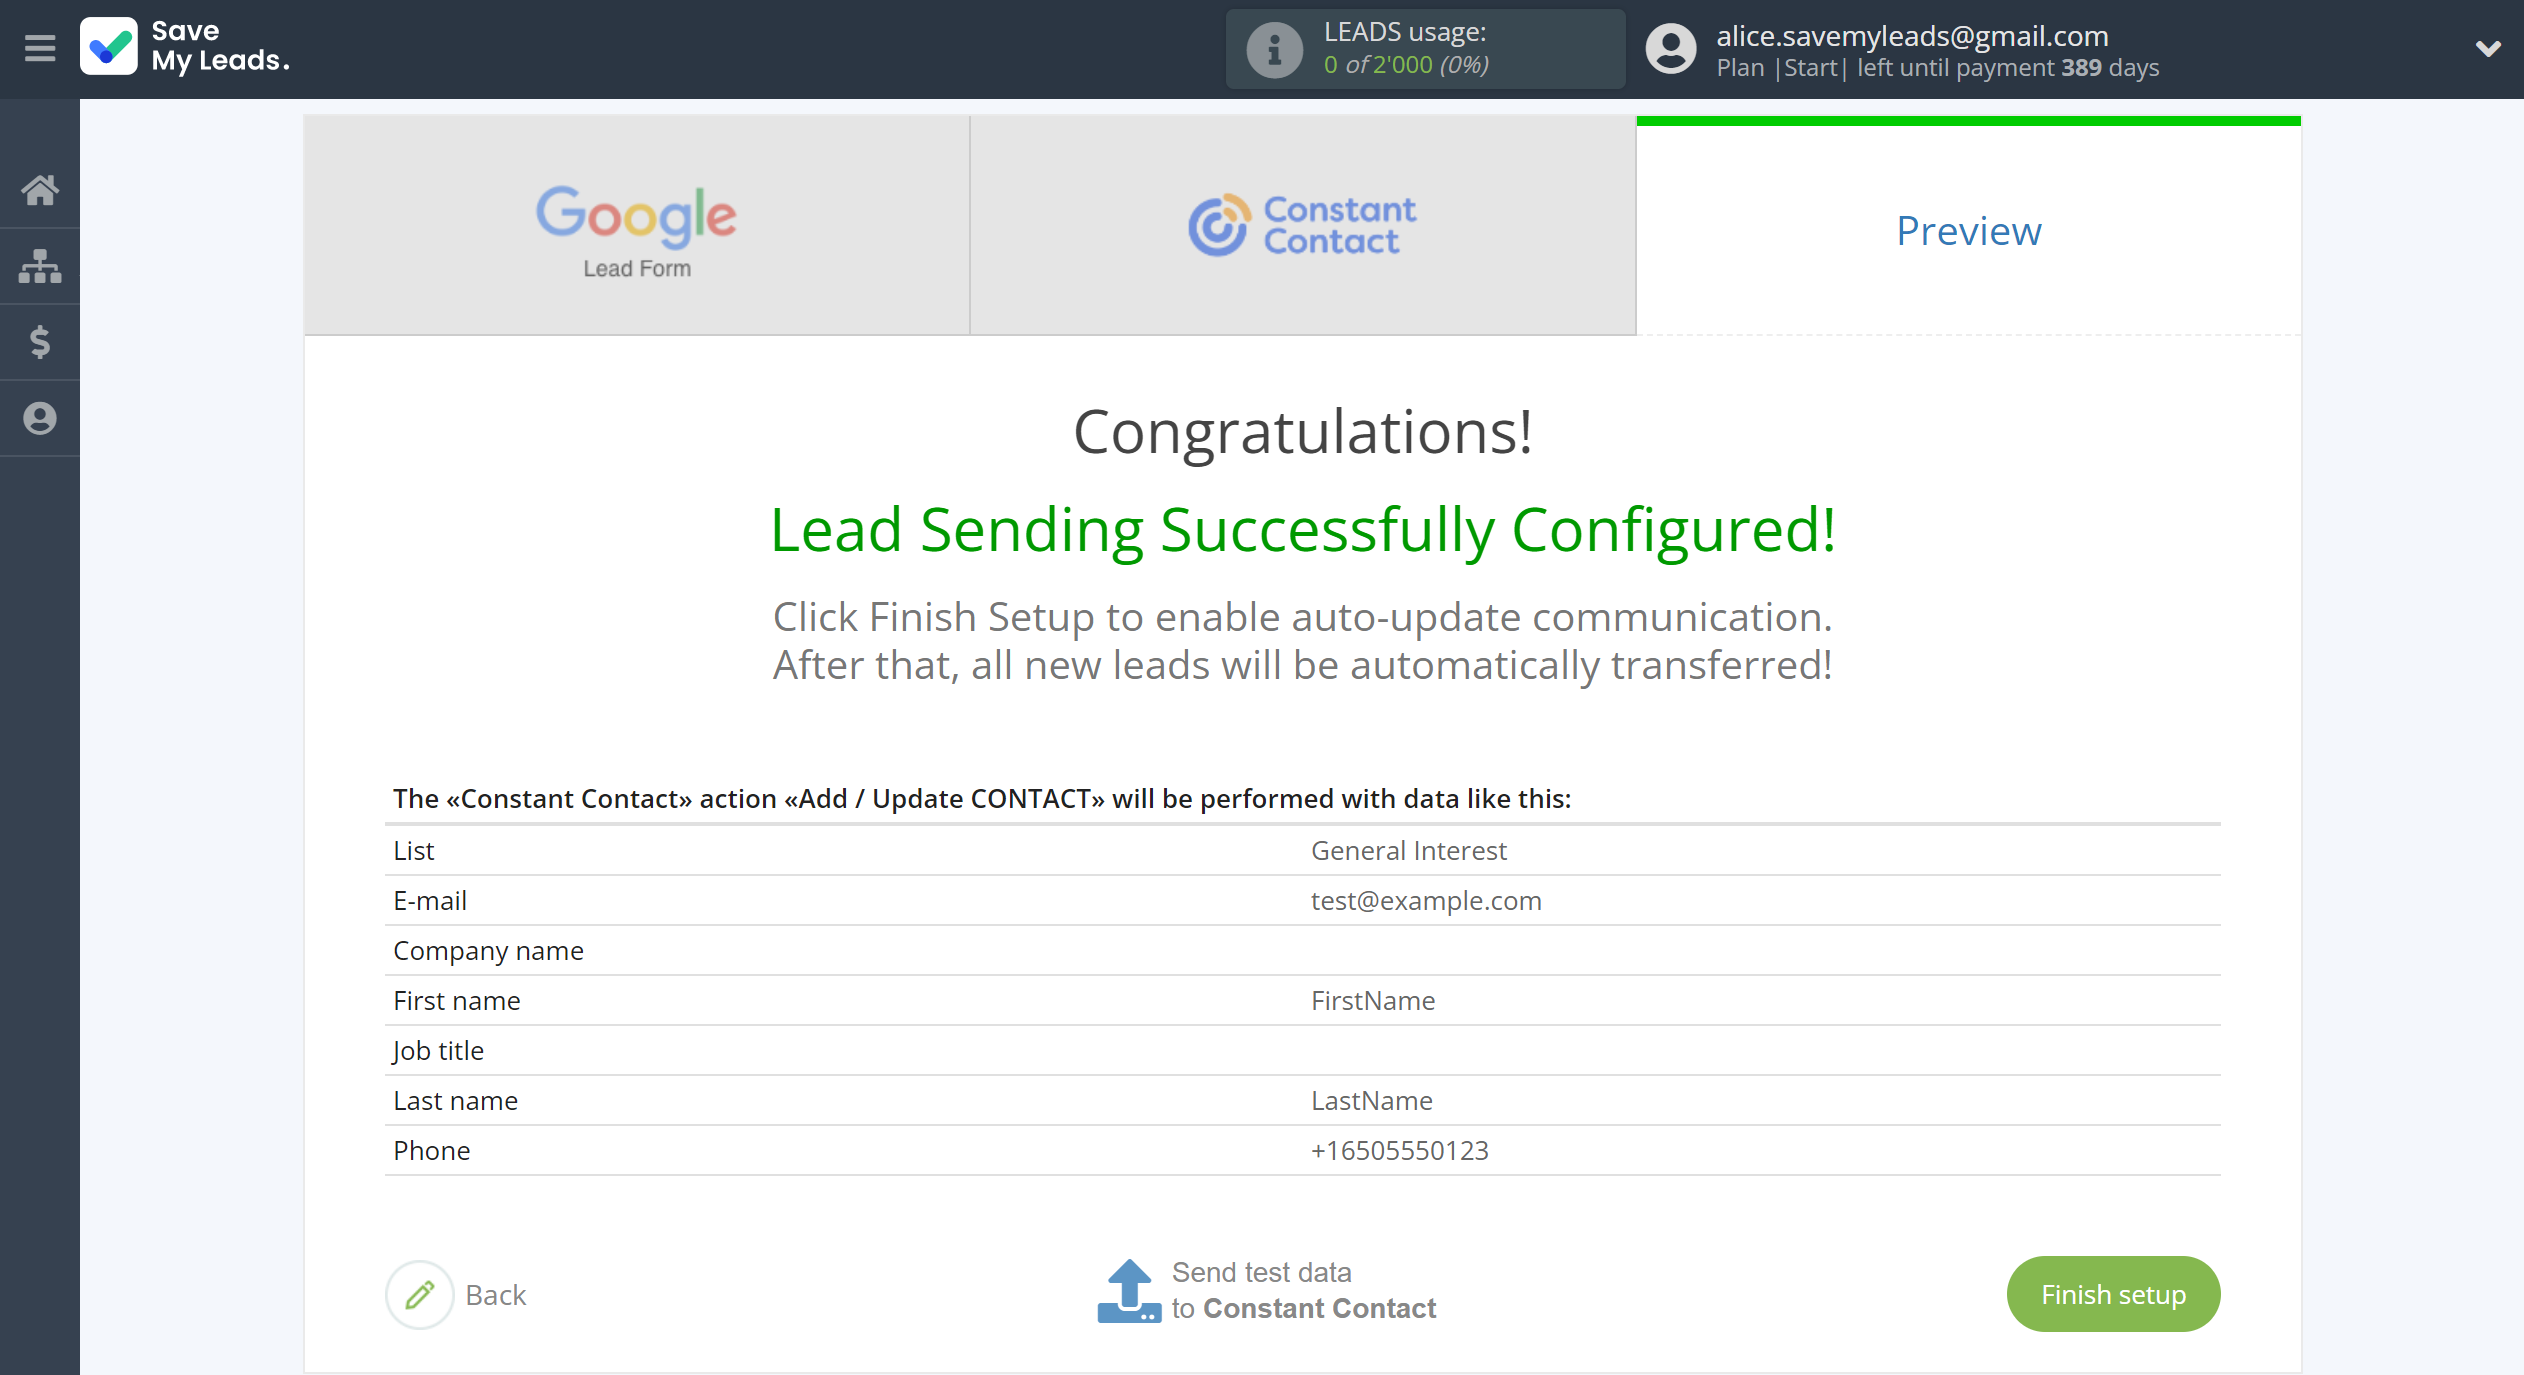 How to Connect Google Lead Form with Constant Contact | Test data